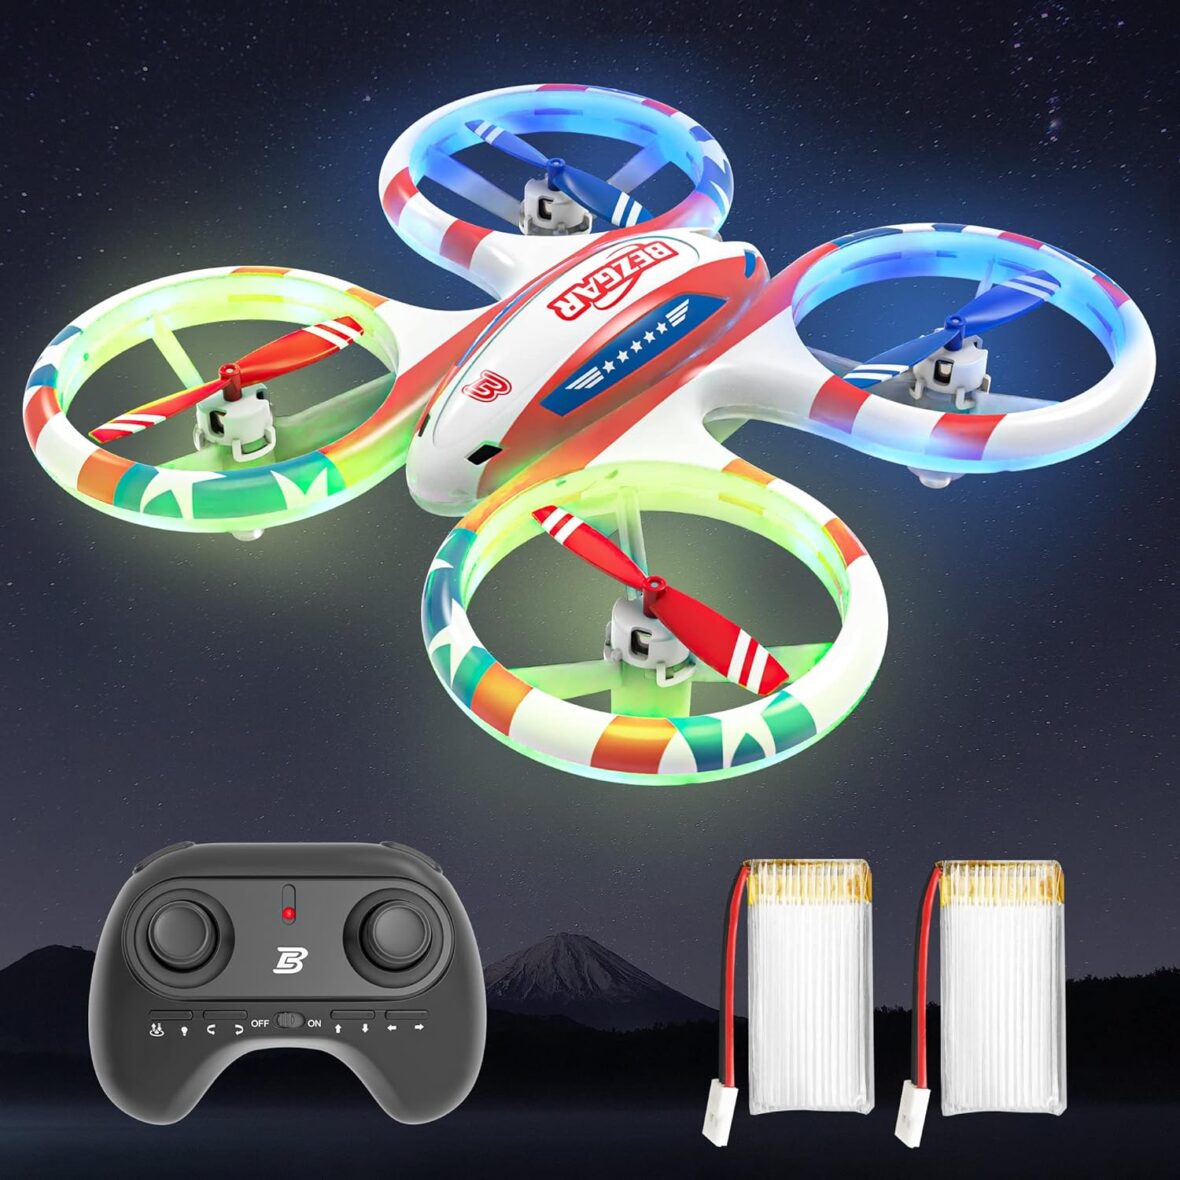 BEZGAR HQ051 Drones for Kids – RC Drone Indoor, LED Remote Control Mini Drone with 3D Flip and 3 Speed Propeller Full Protect Small Drone